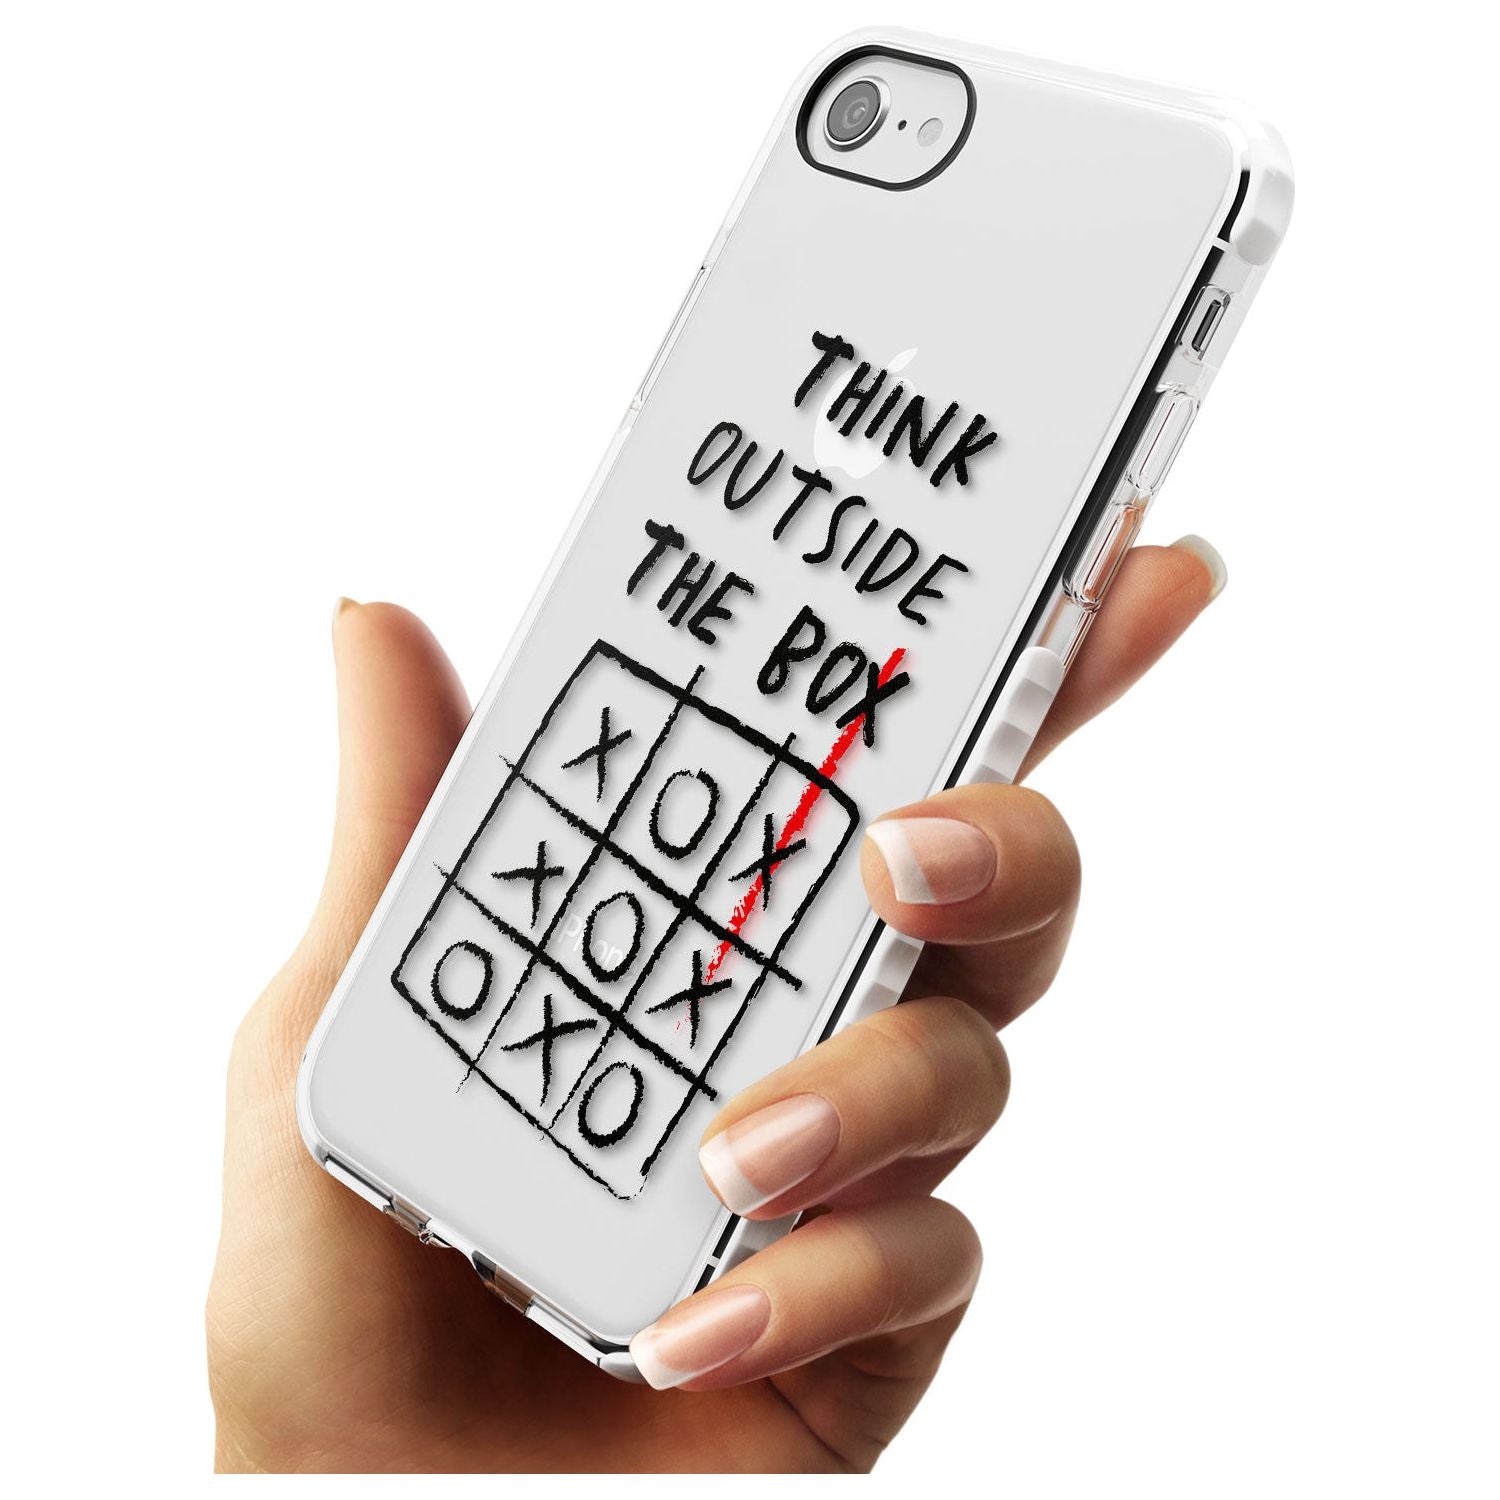 "Think Outside the Box" Impact Phone Case for iPhone SE 8 7 Plus